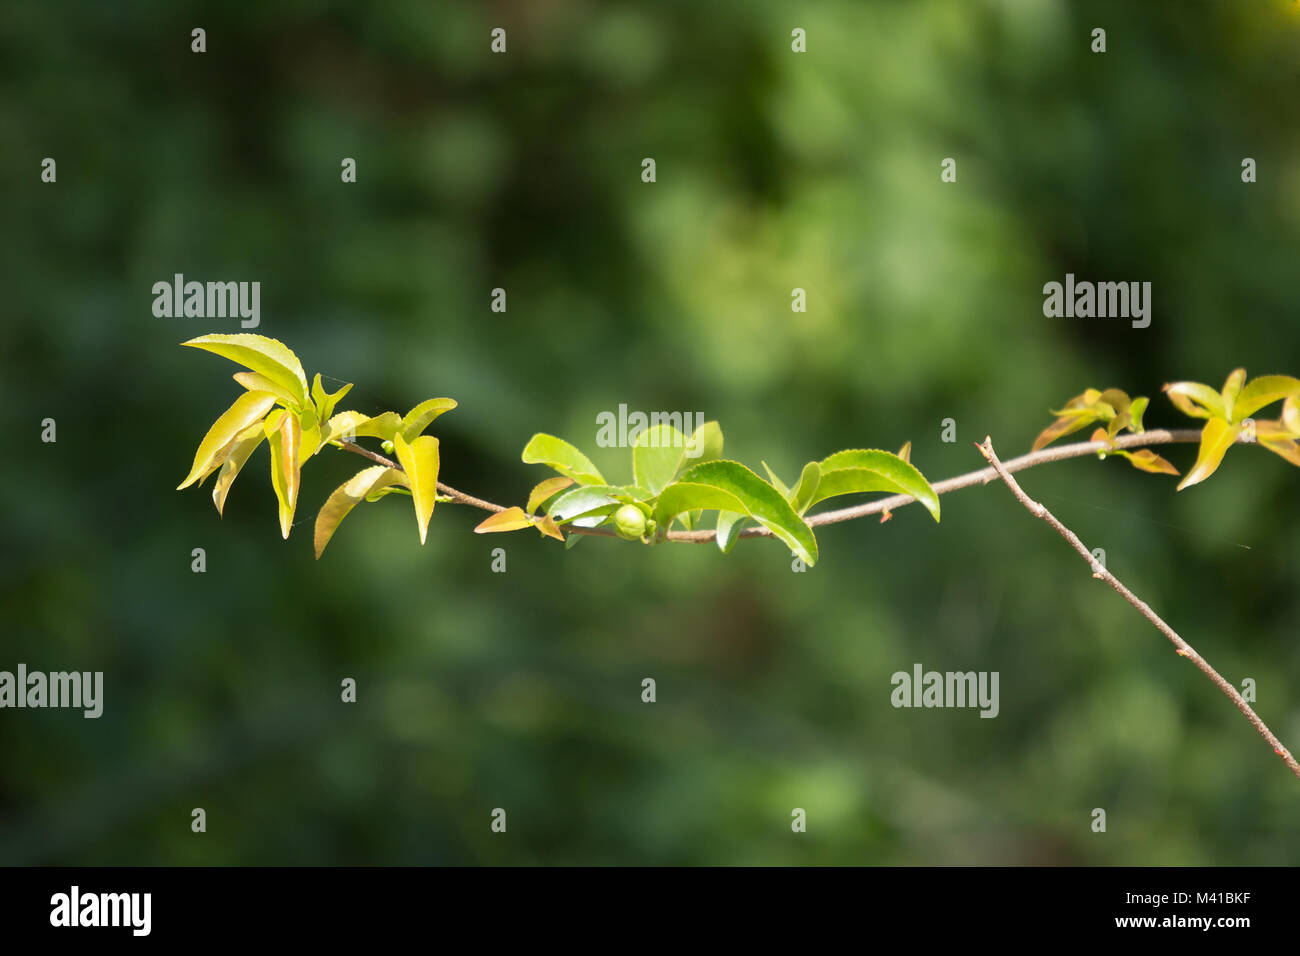 Young Green leaf of Fried Egg Tree  or  Oncoba spinosa Forssk. Stock Photo